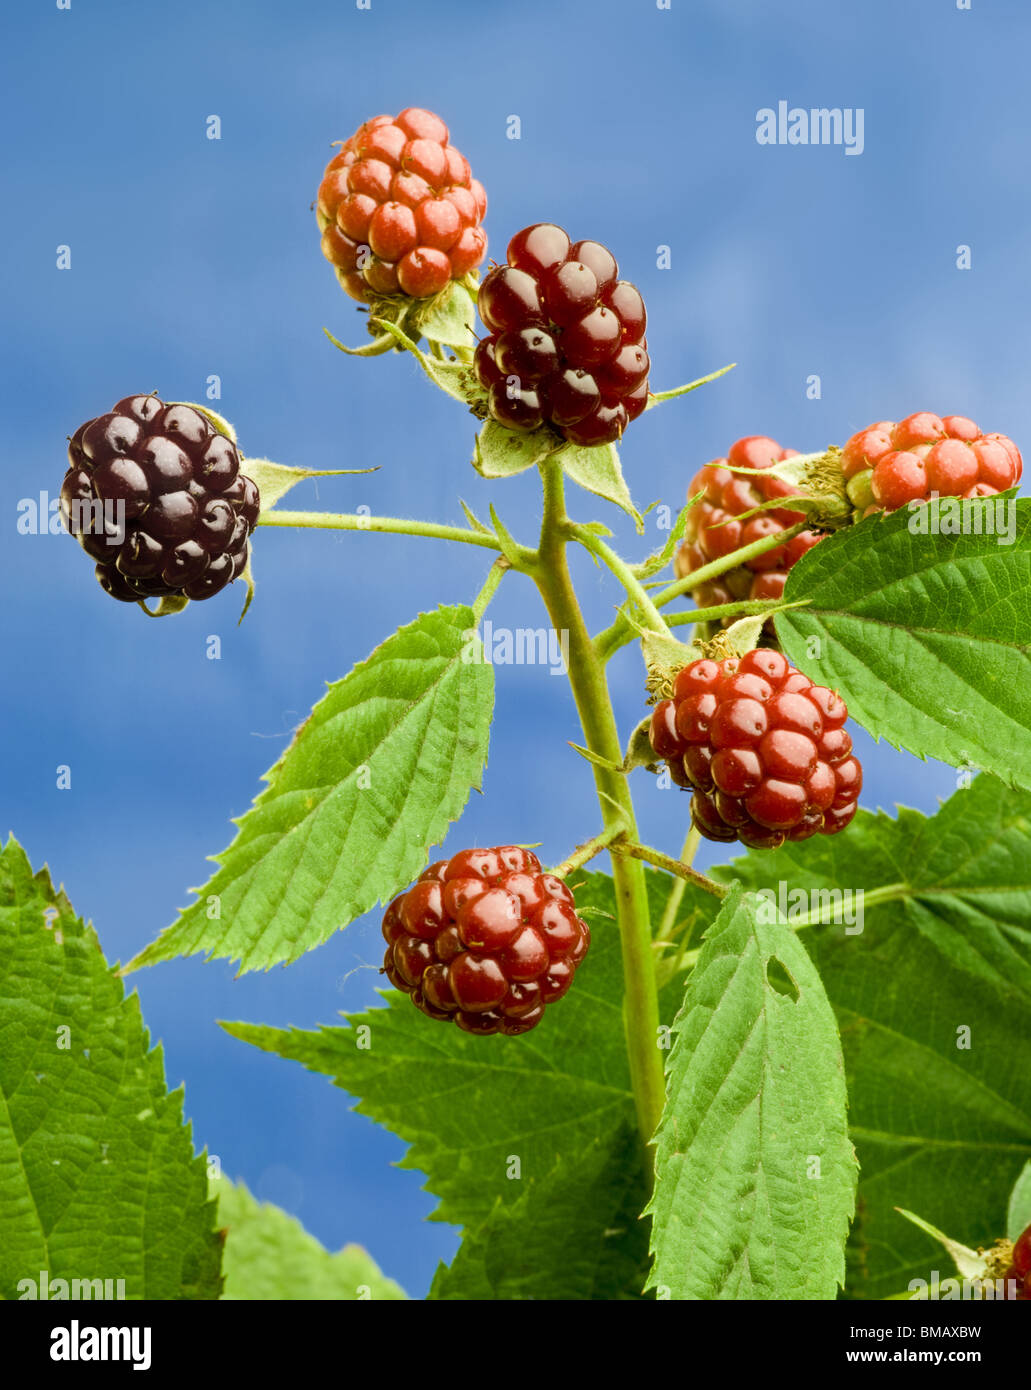 The branch of blackberry on a blue background Stock Photo